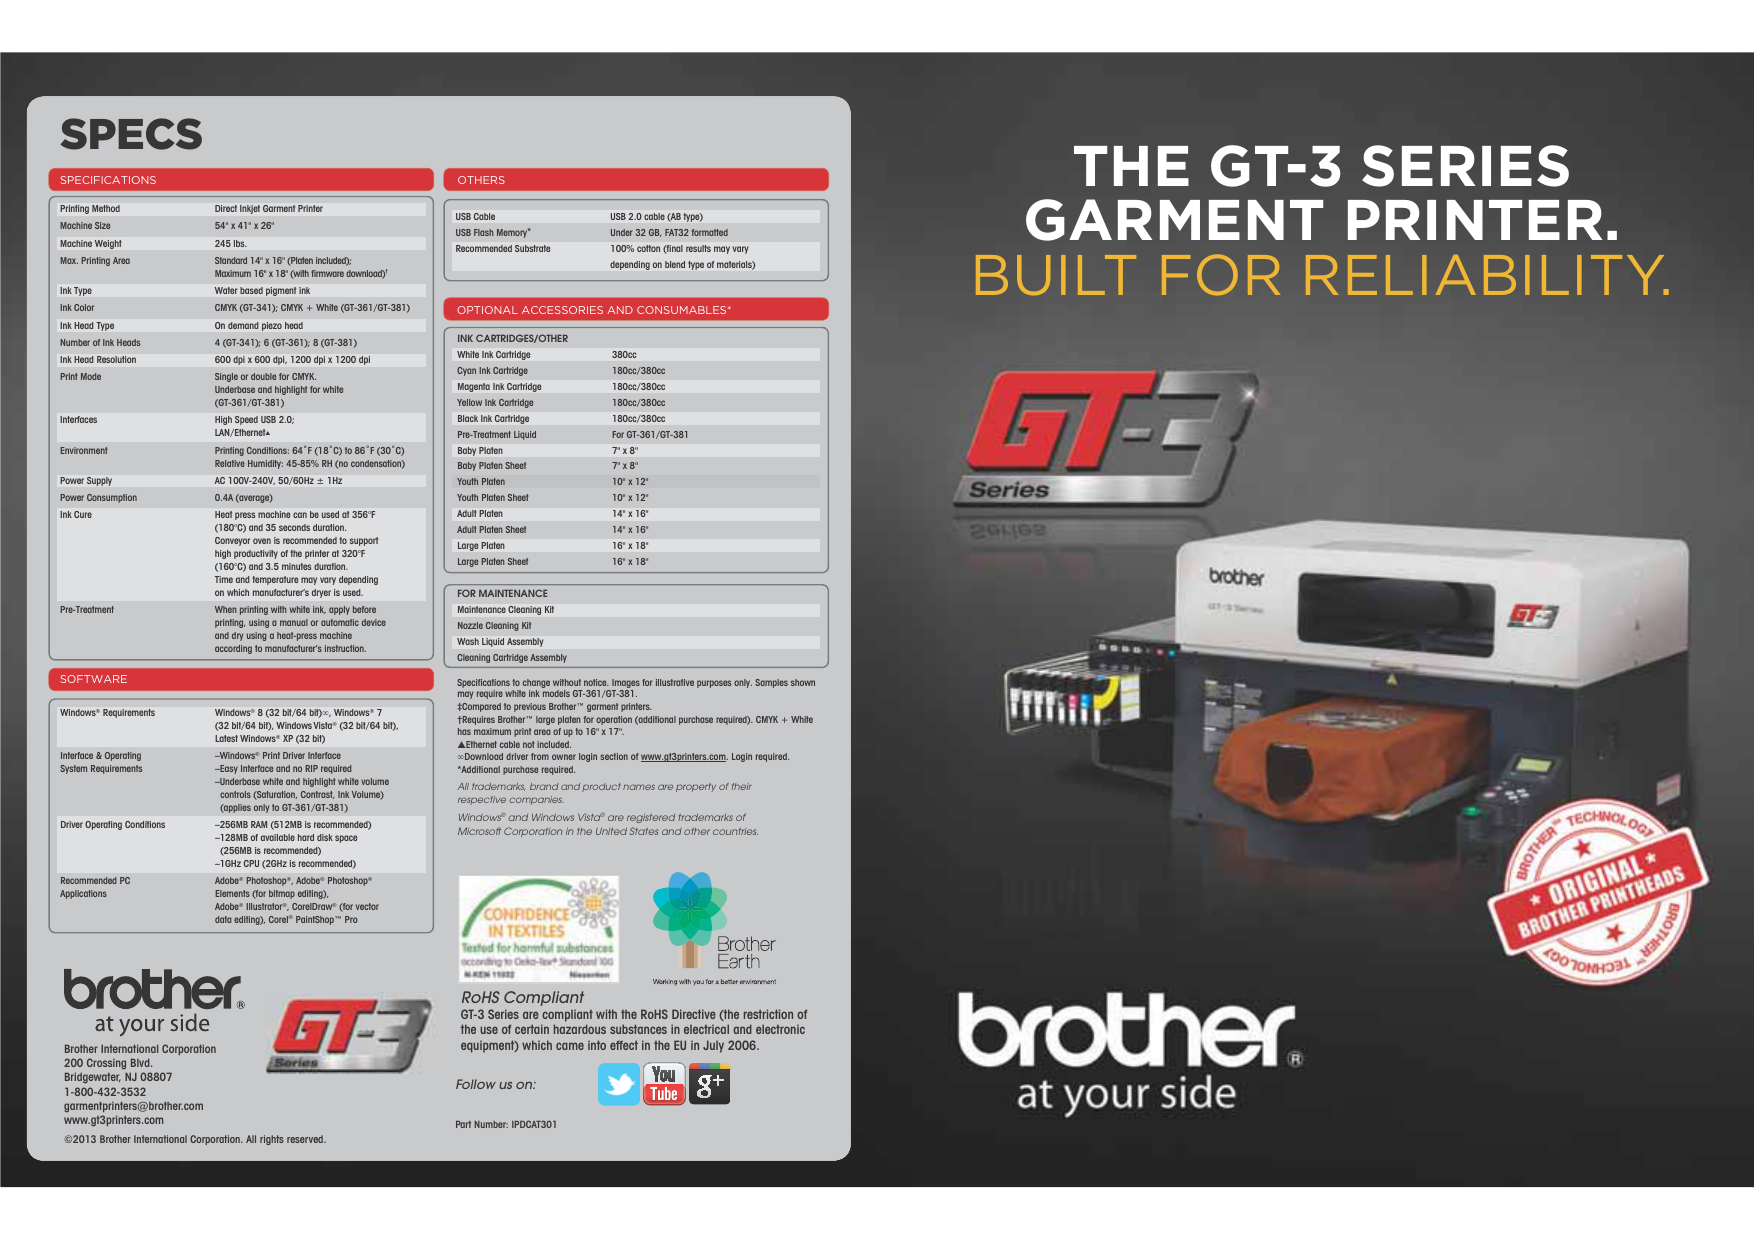 brother gt 541 specs